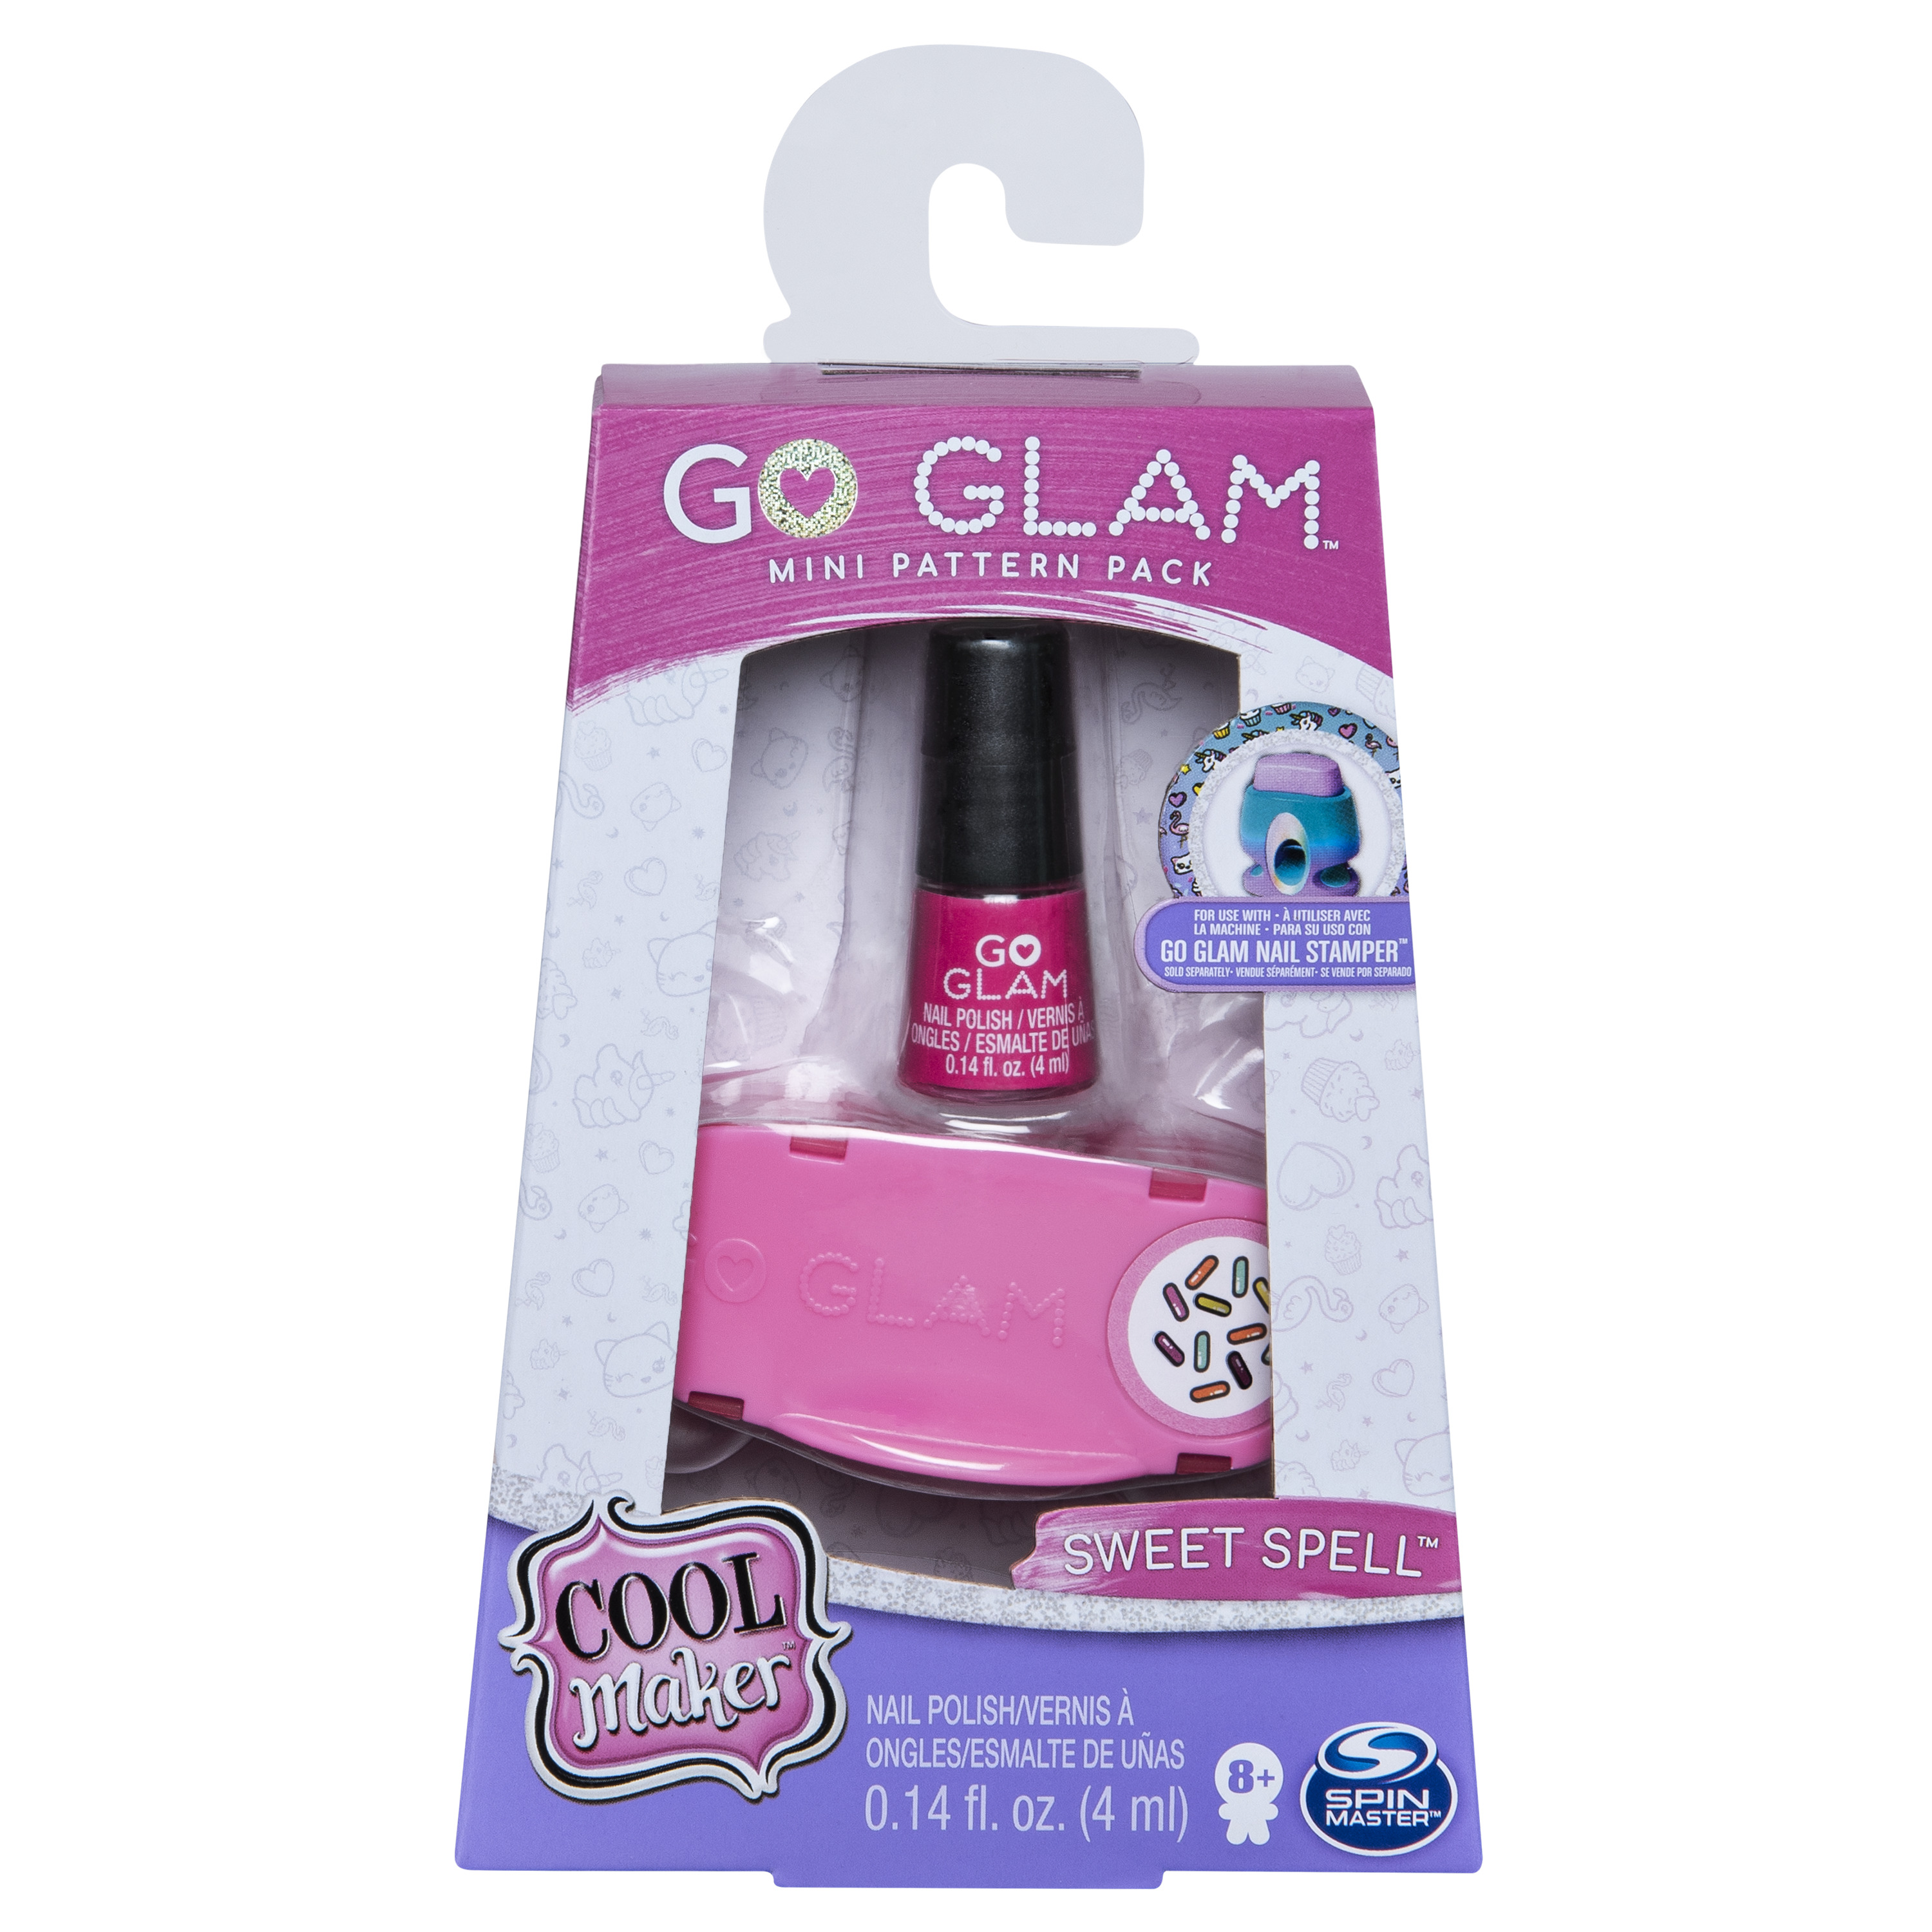 Go Glam Nail Stamper Review